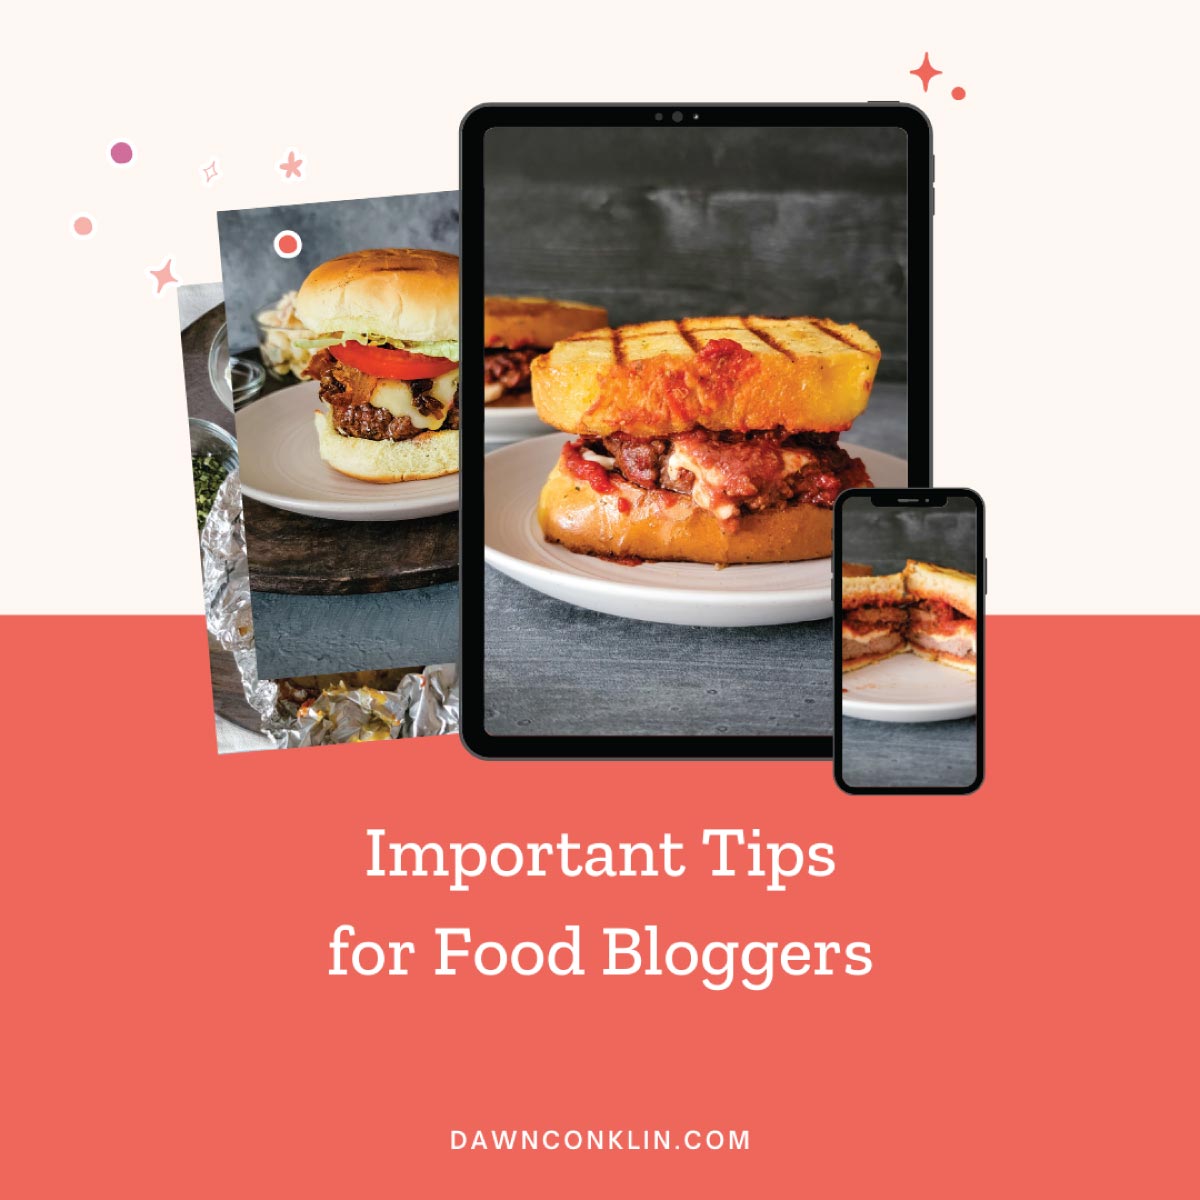 Important tips for food bloggers. Image of a pizza burger on a tablet and cell phone.